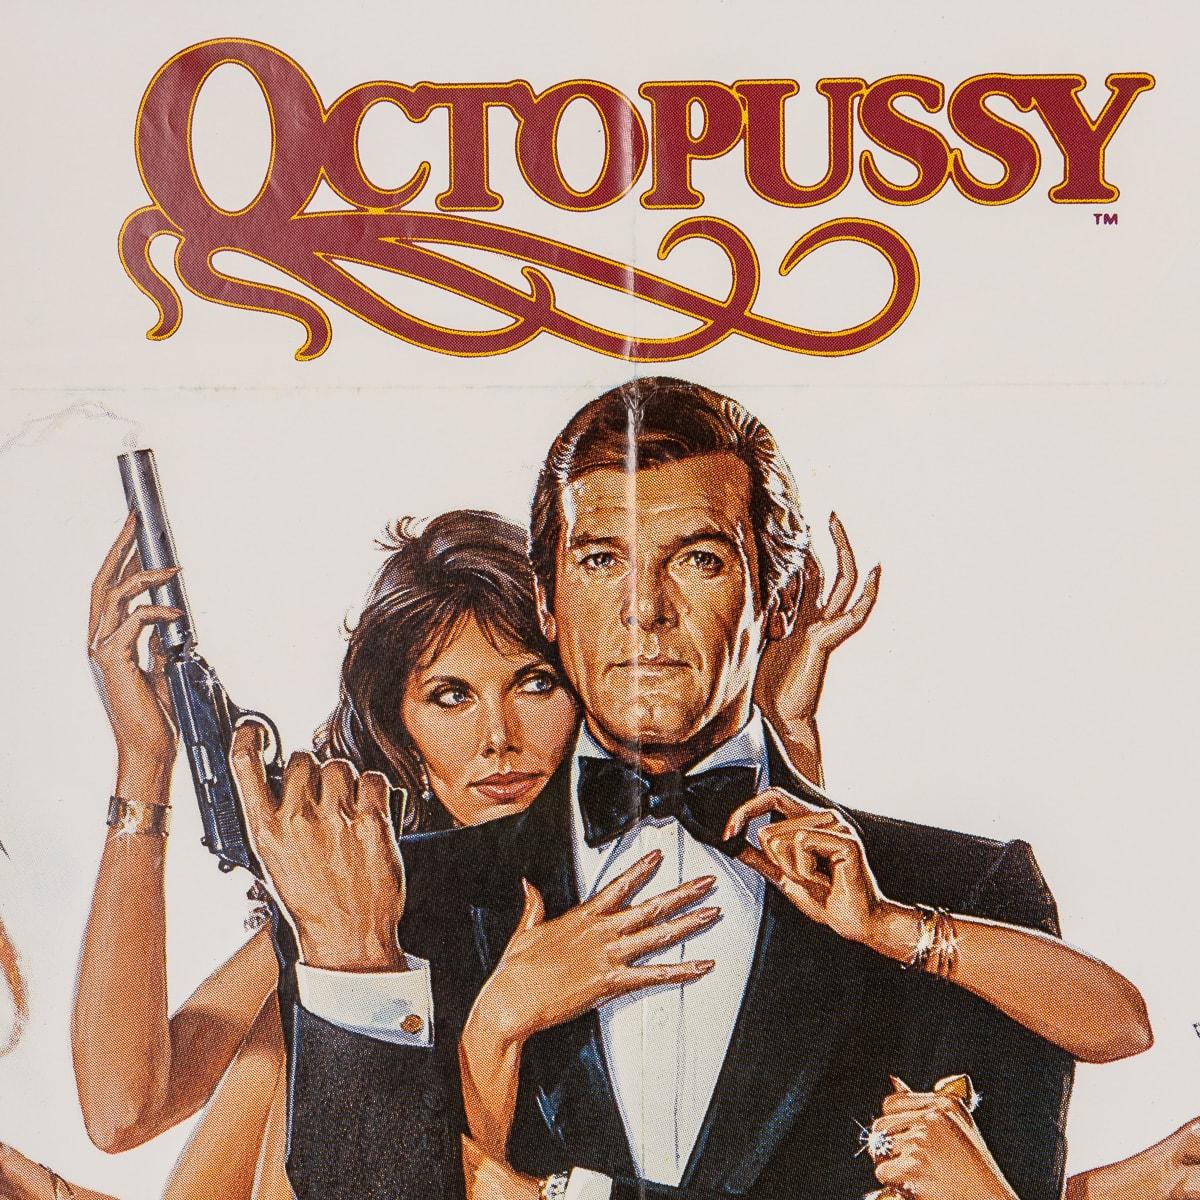 Paint Original French Release James Bond 'Octopussy' Poster, c.1983 For Sale